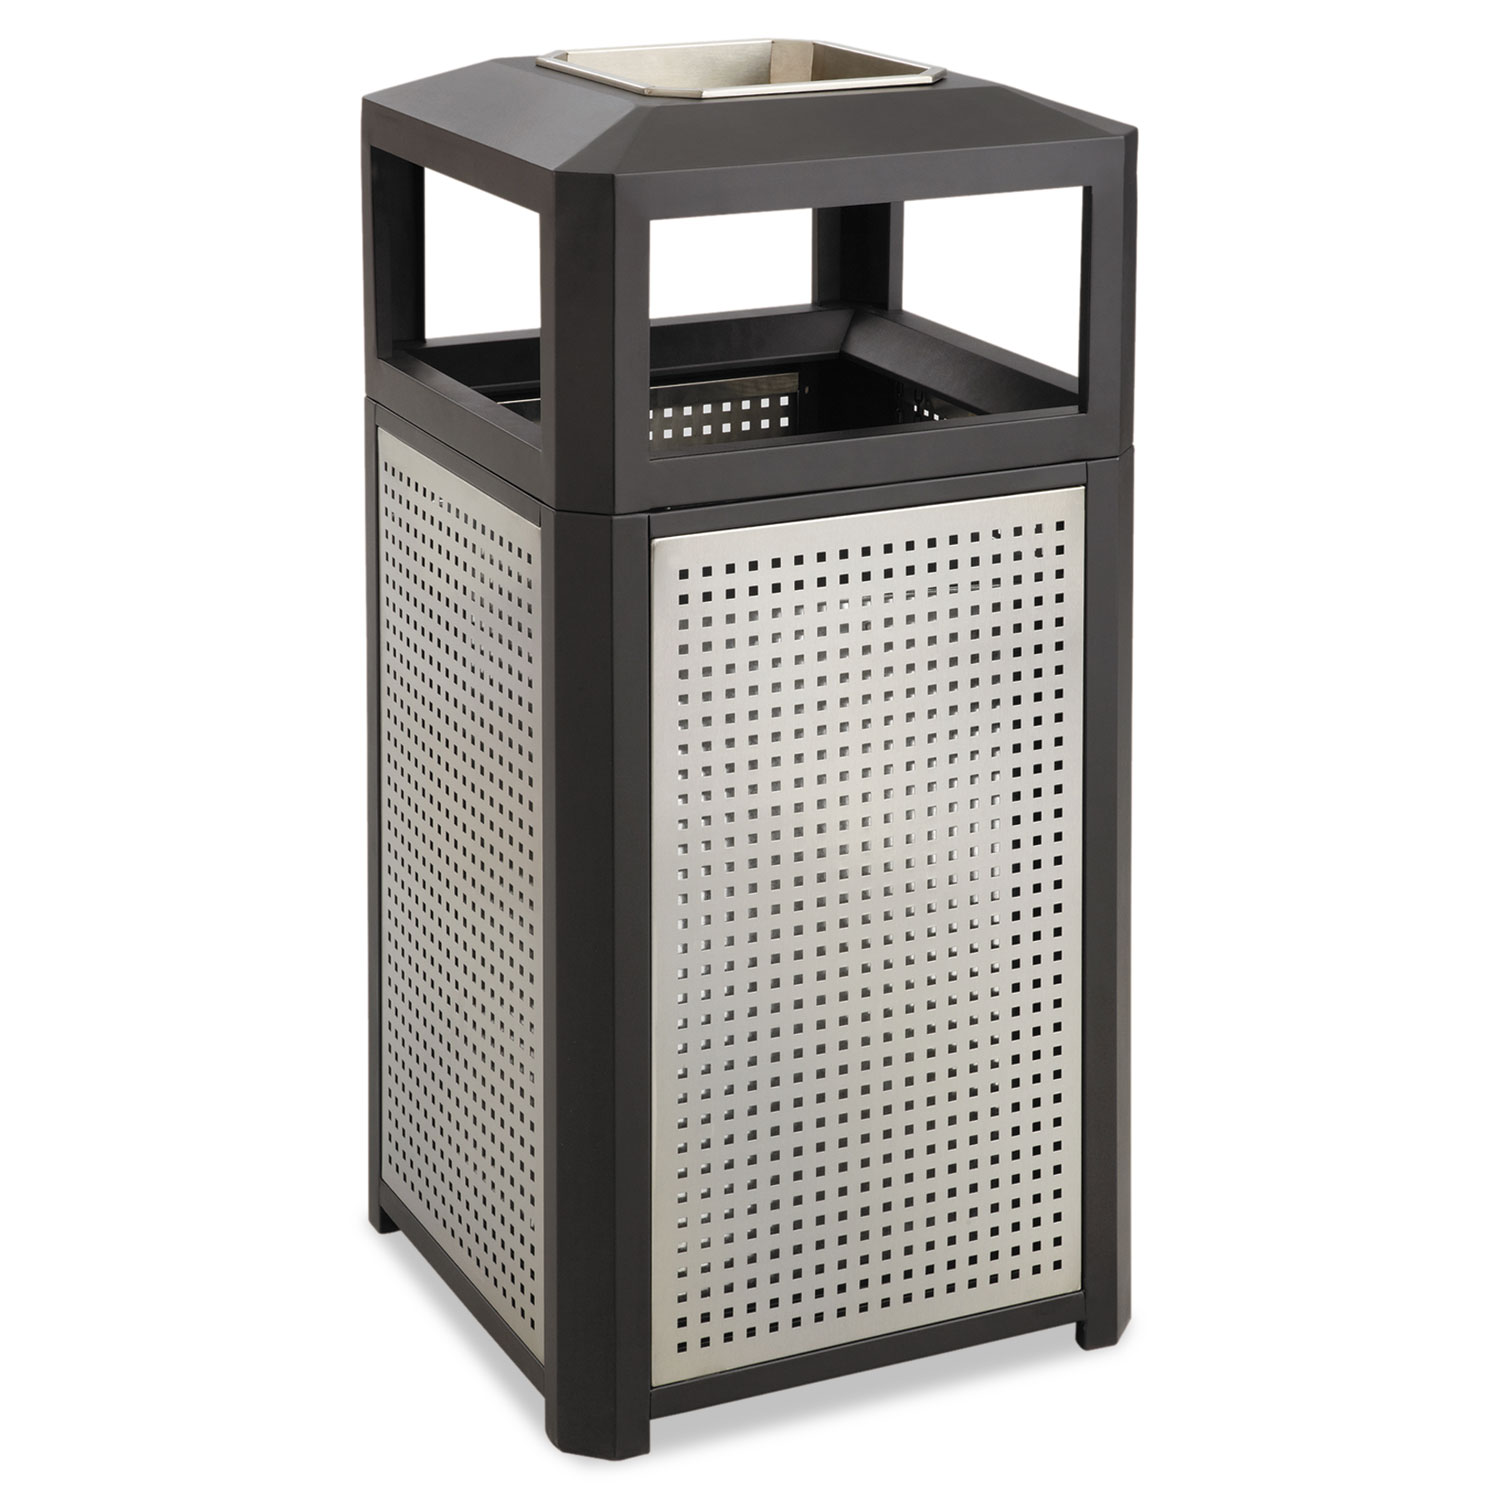 Ashtray-Top Evos Series Steel Waste Container, 38 gal, Black